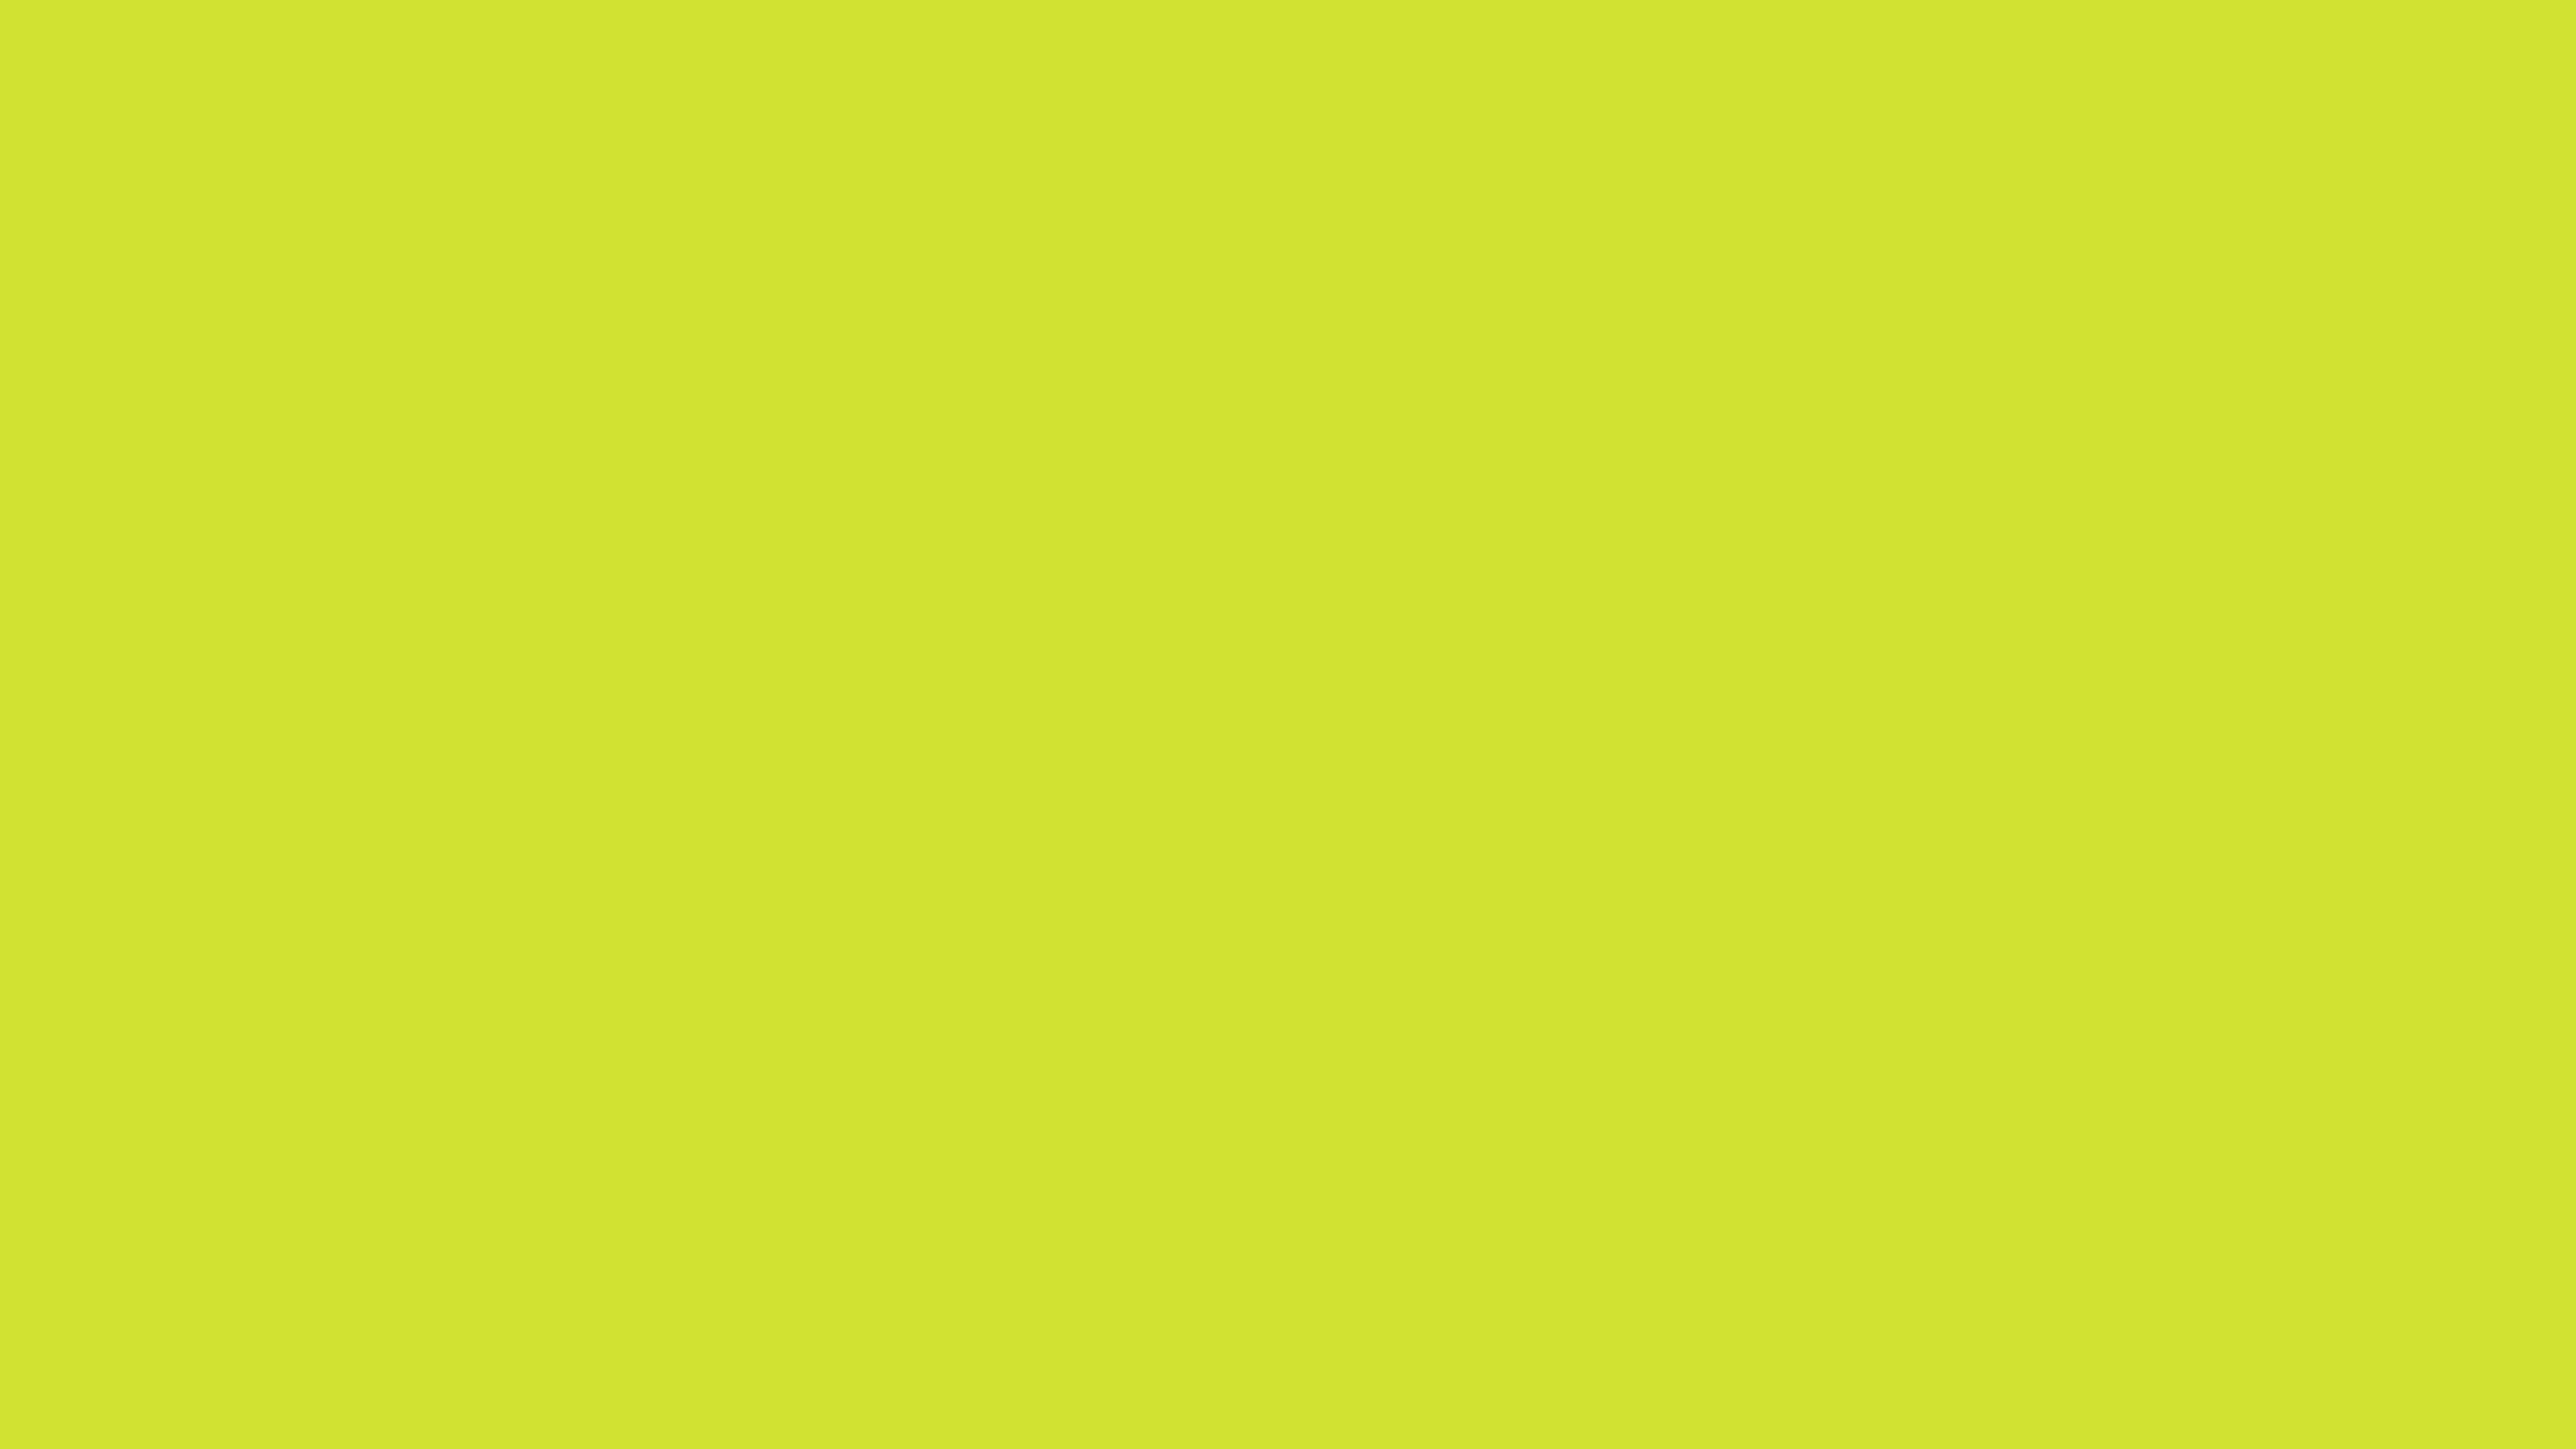 7680x4320 Pear Solid Color Background